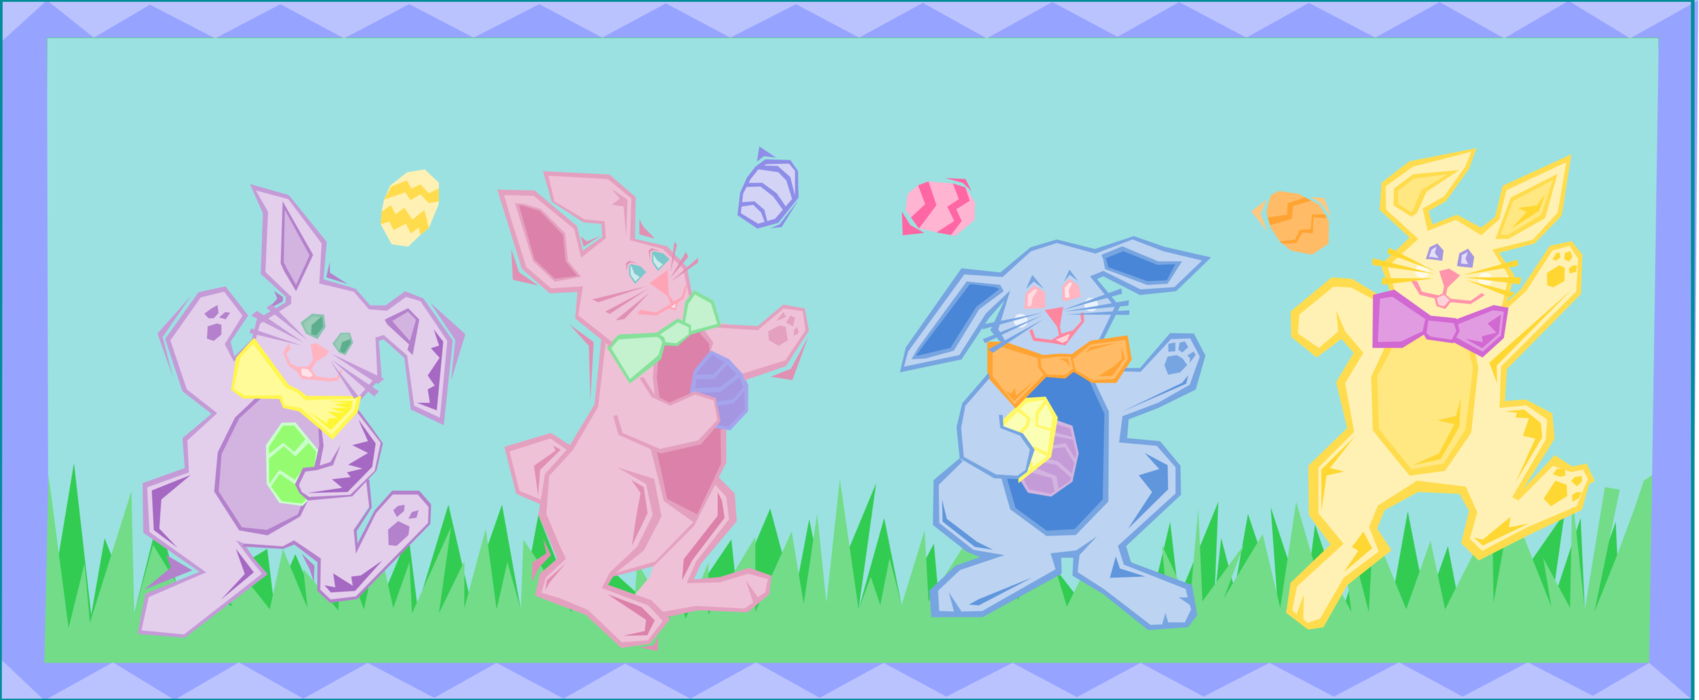 Vector Illustration of Easter Rabbit Bunnies Dancing with Eggs